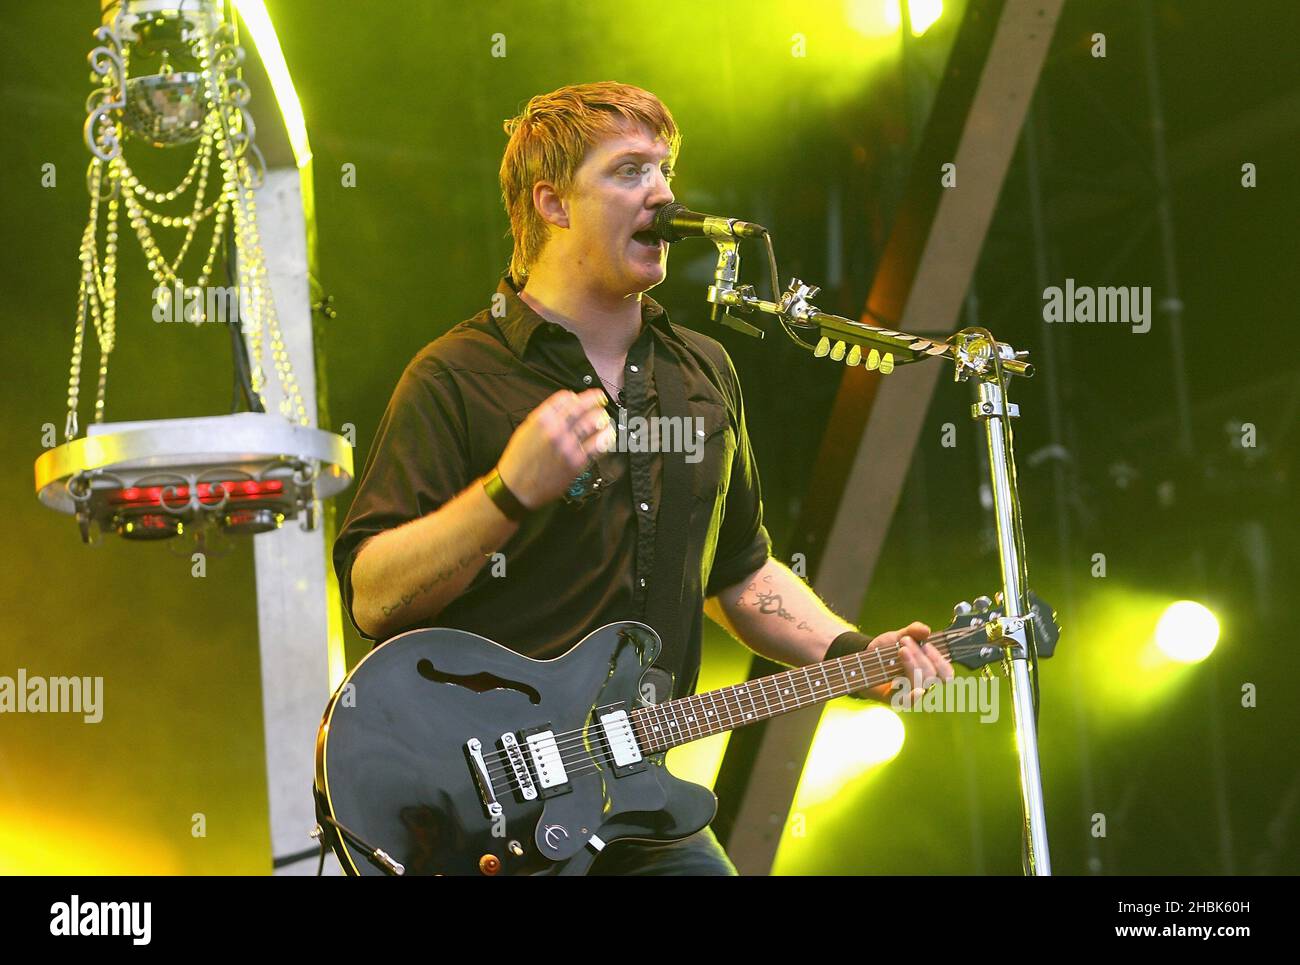 Josh Homme and his band Queens of the Stone Age perform on stage at the O2 Wireless Festival at Hyde Park, London. Stock Photo